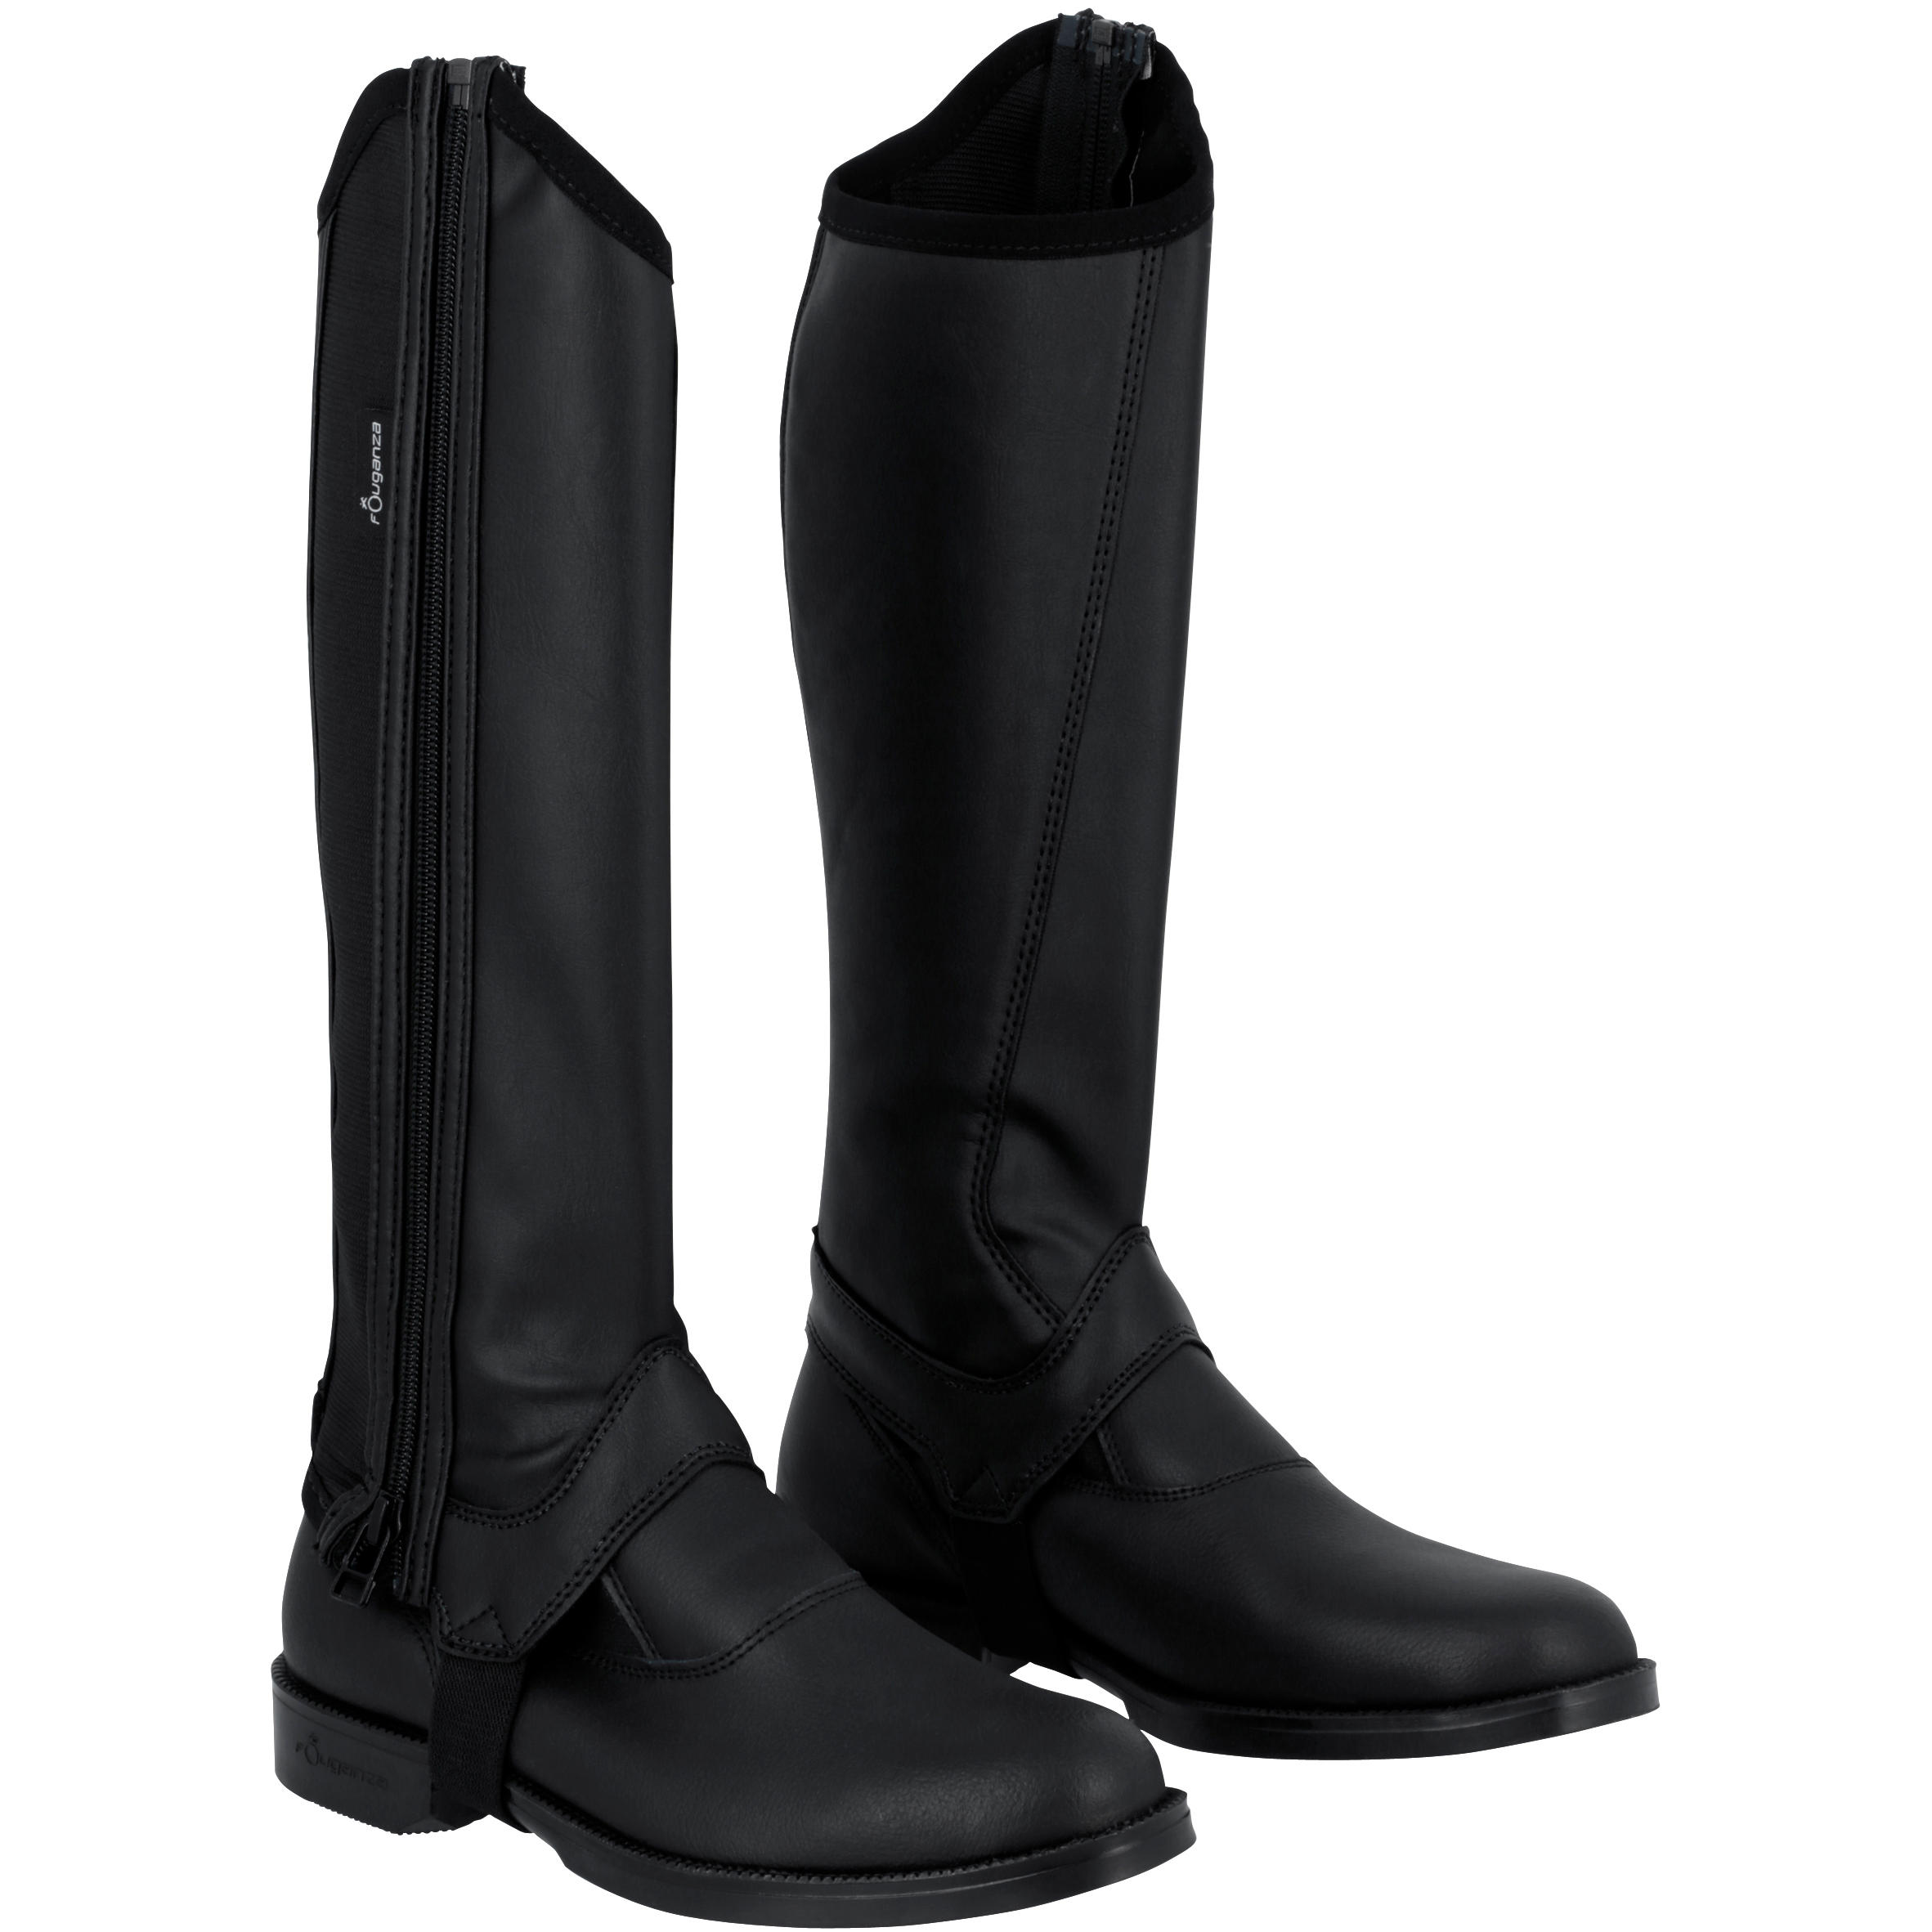 Kids' Horse Riding Classic Synthetic Half Chaps 140 - Black 3/9